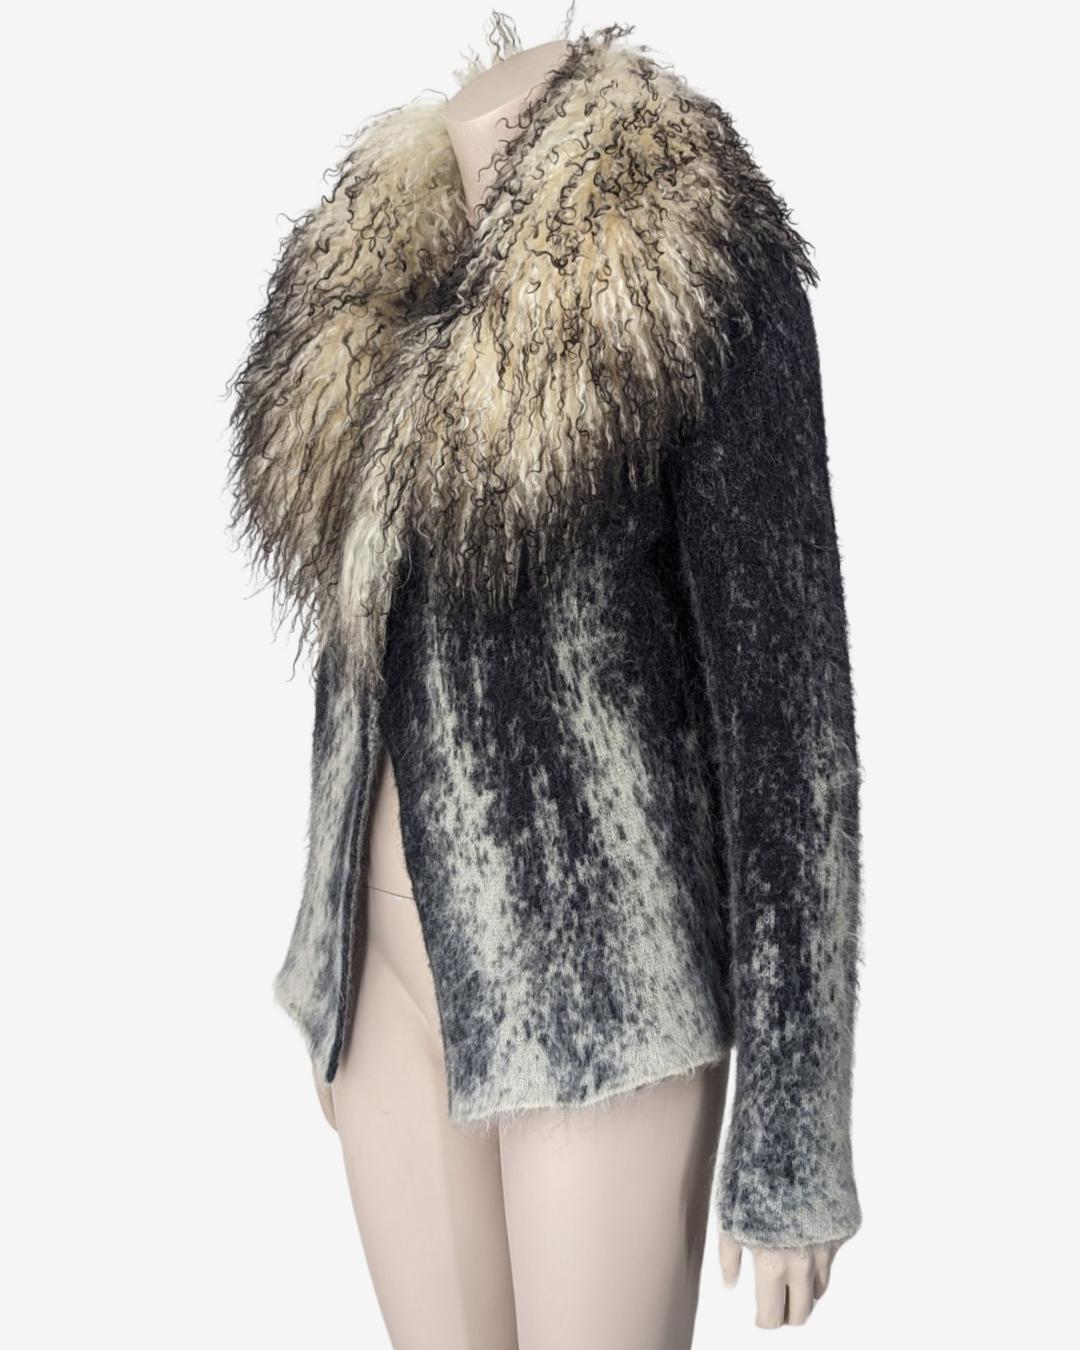 Roberto Cavalli cream and grey mohair cardigan with Mongolian fur collar - Class line

. Knit mix of light and soft ivory and grey wool and mohair.
. Mongolian voluminous fur collar removable

Fits S, M
Tags  38FR

Flat measurements : ( slightly